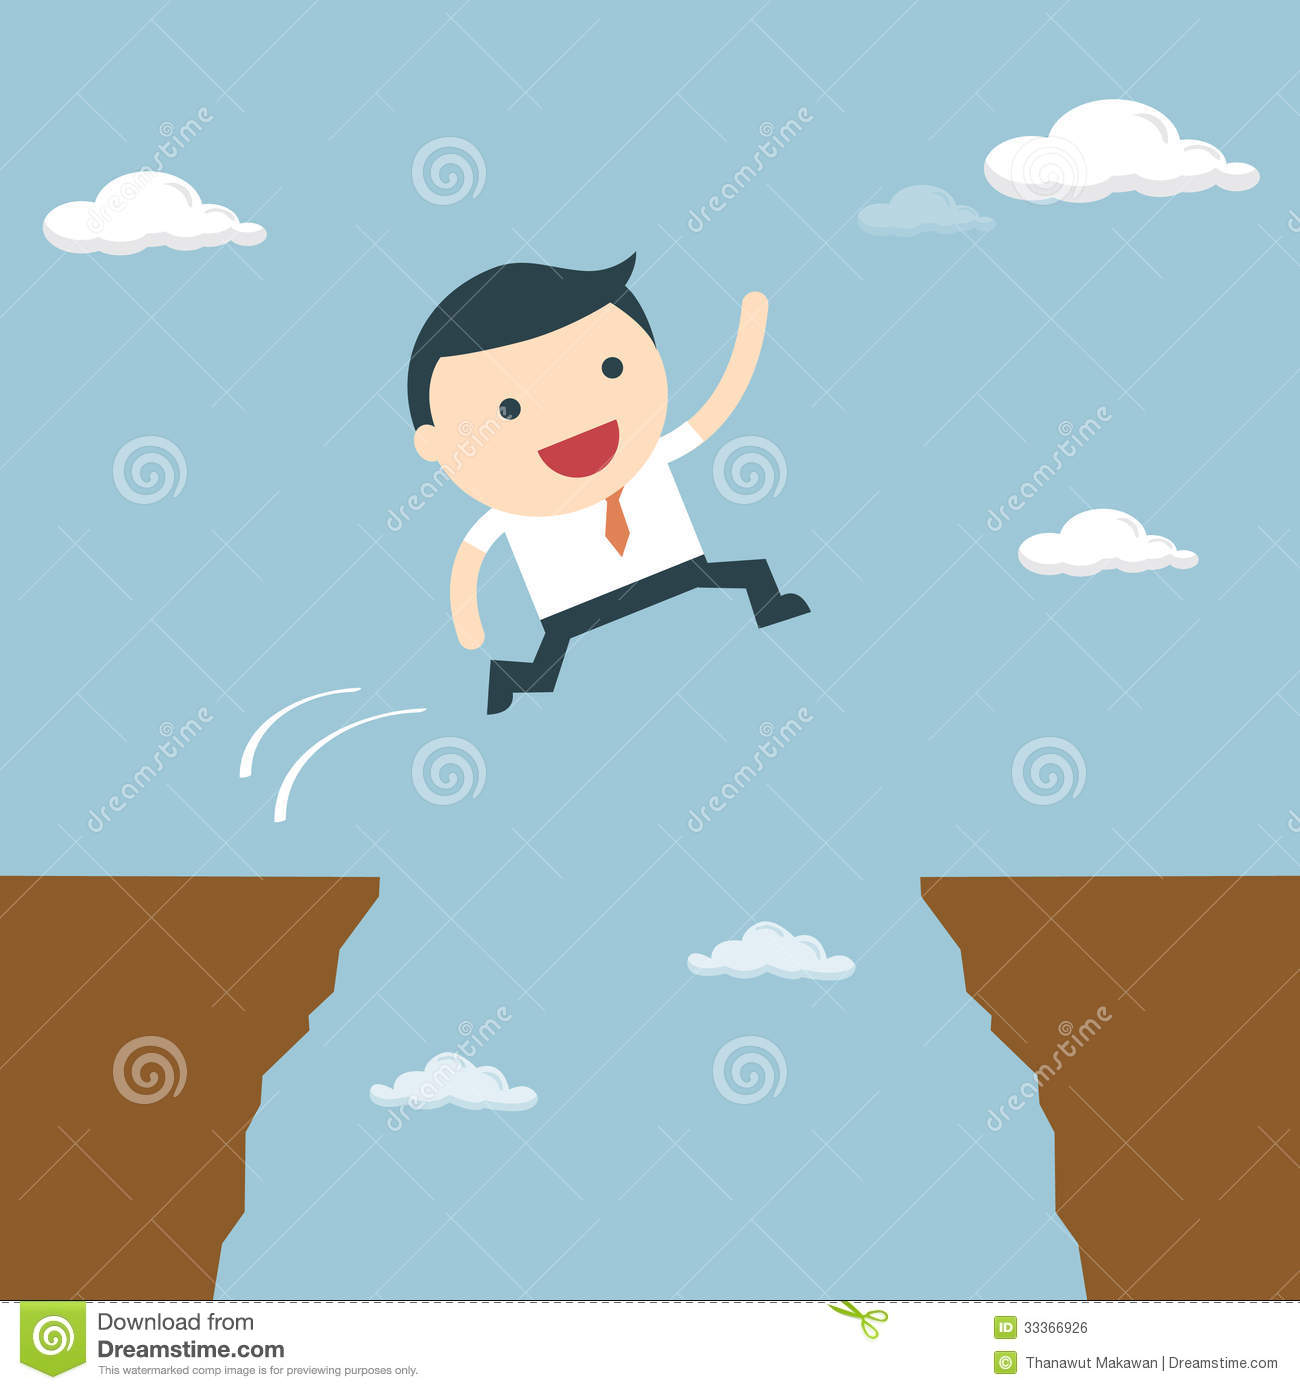 Businessman Jumping Over The Cliff To Goal Royalty Free Stock Image